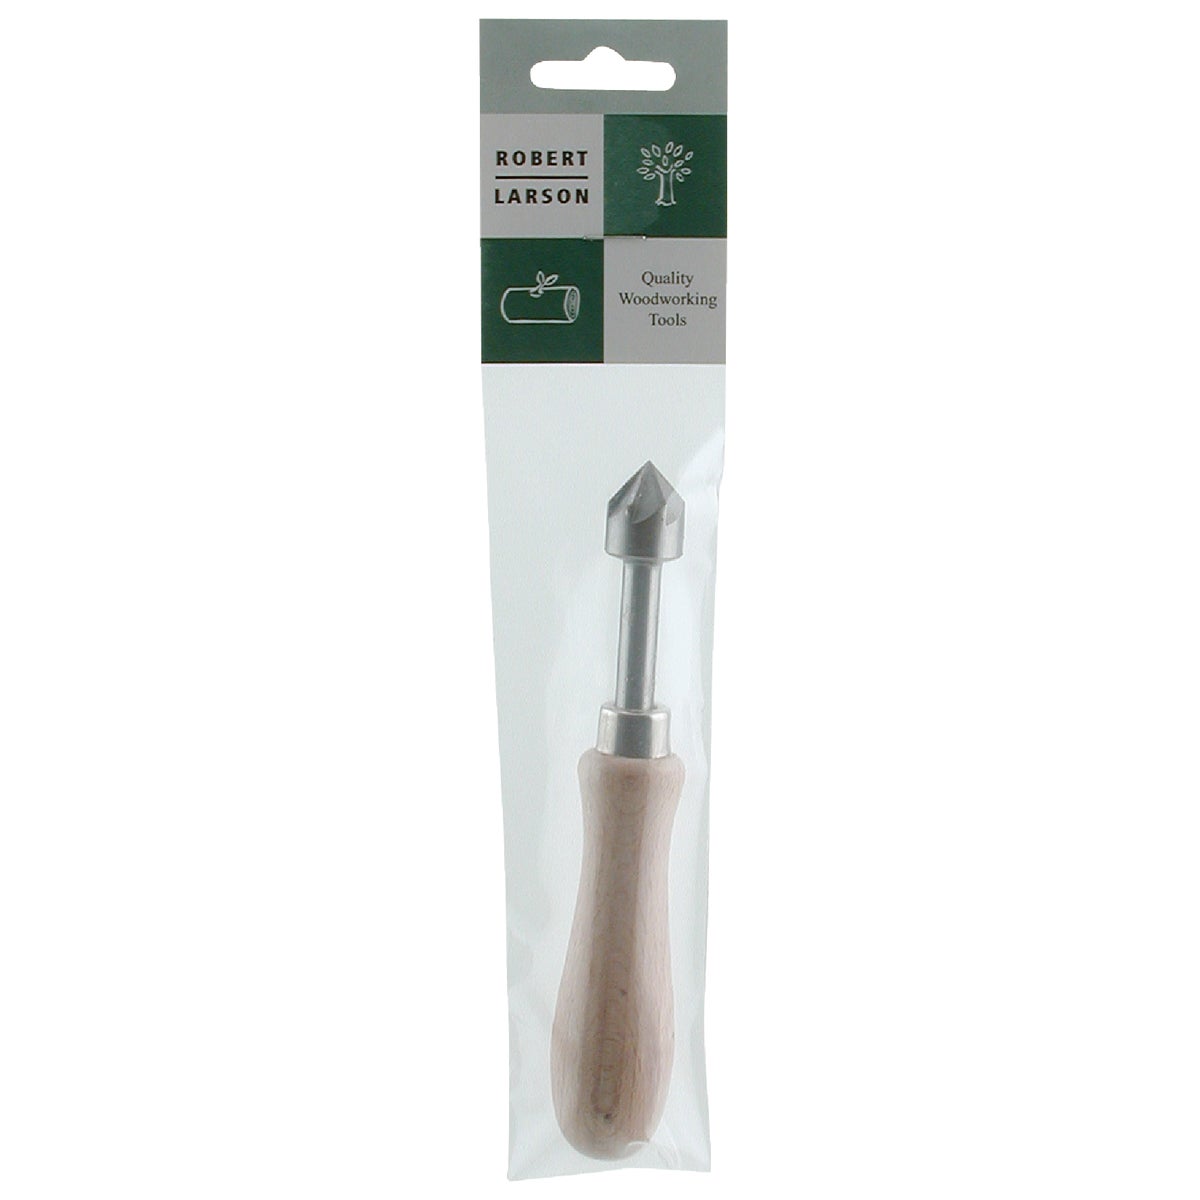 Item 315965, Handy and quick, this beautifully made countersink is a tool every 